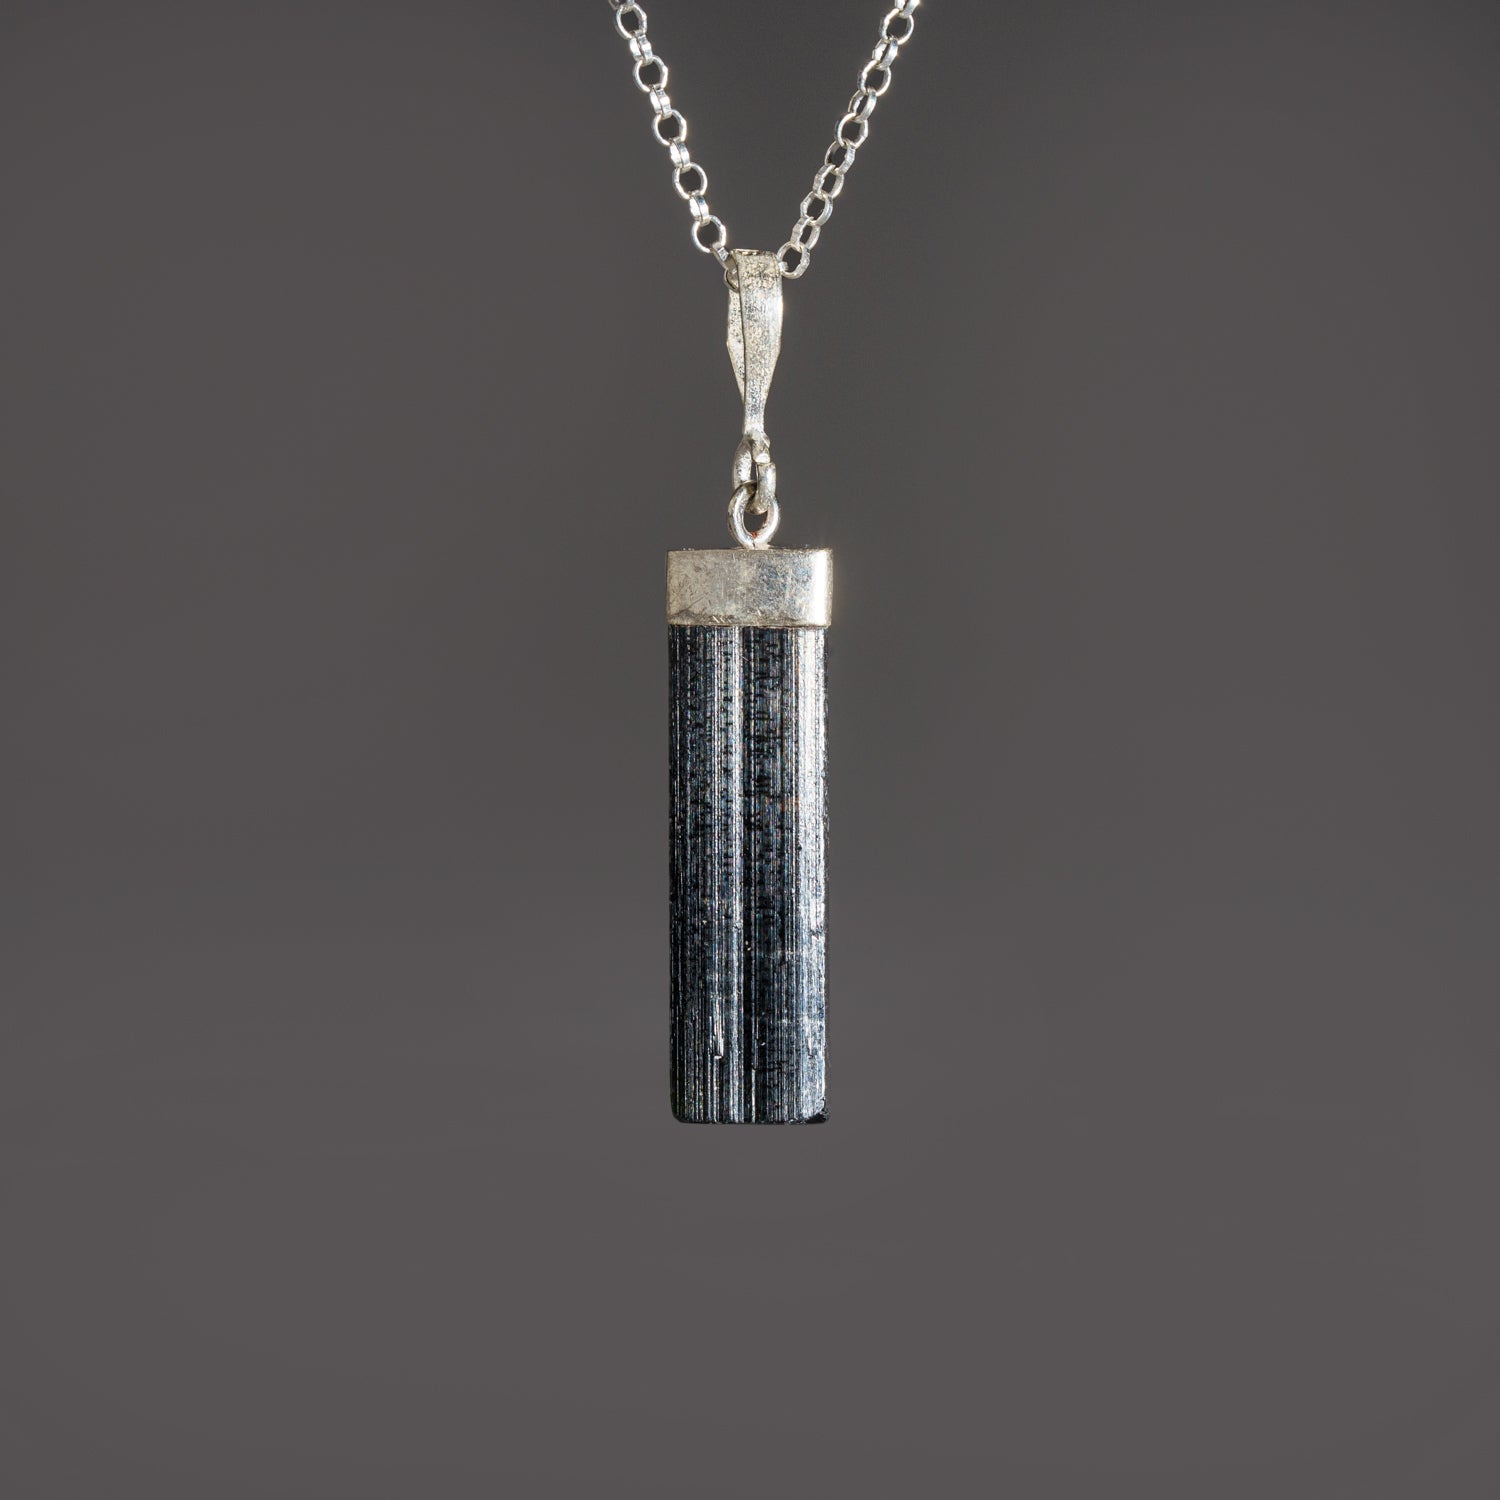 Genuine Black Tourmaline Pendant (3-5 grams) with 18" Sterling Silver Chain